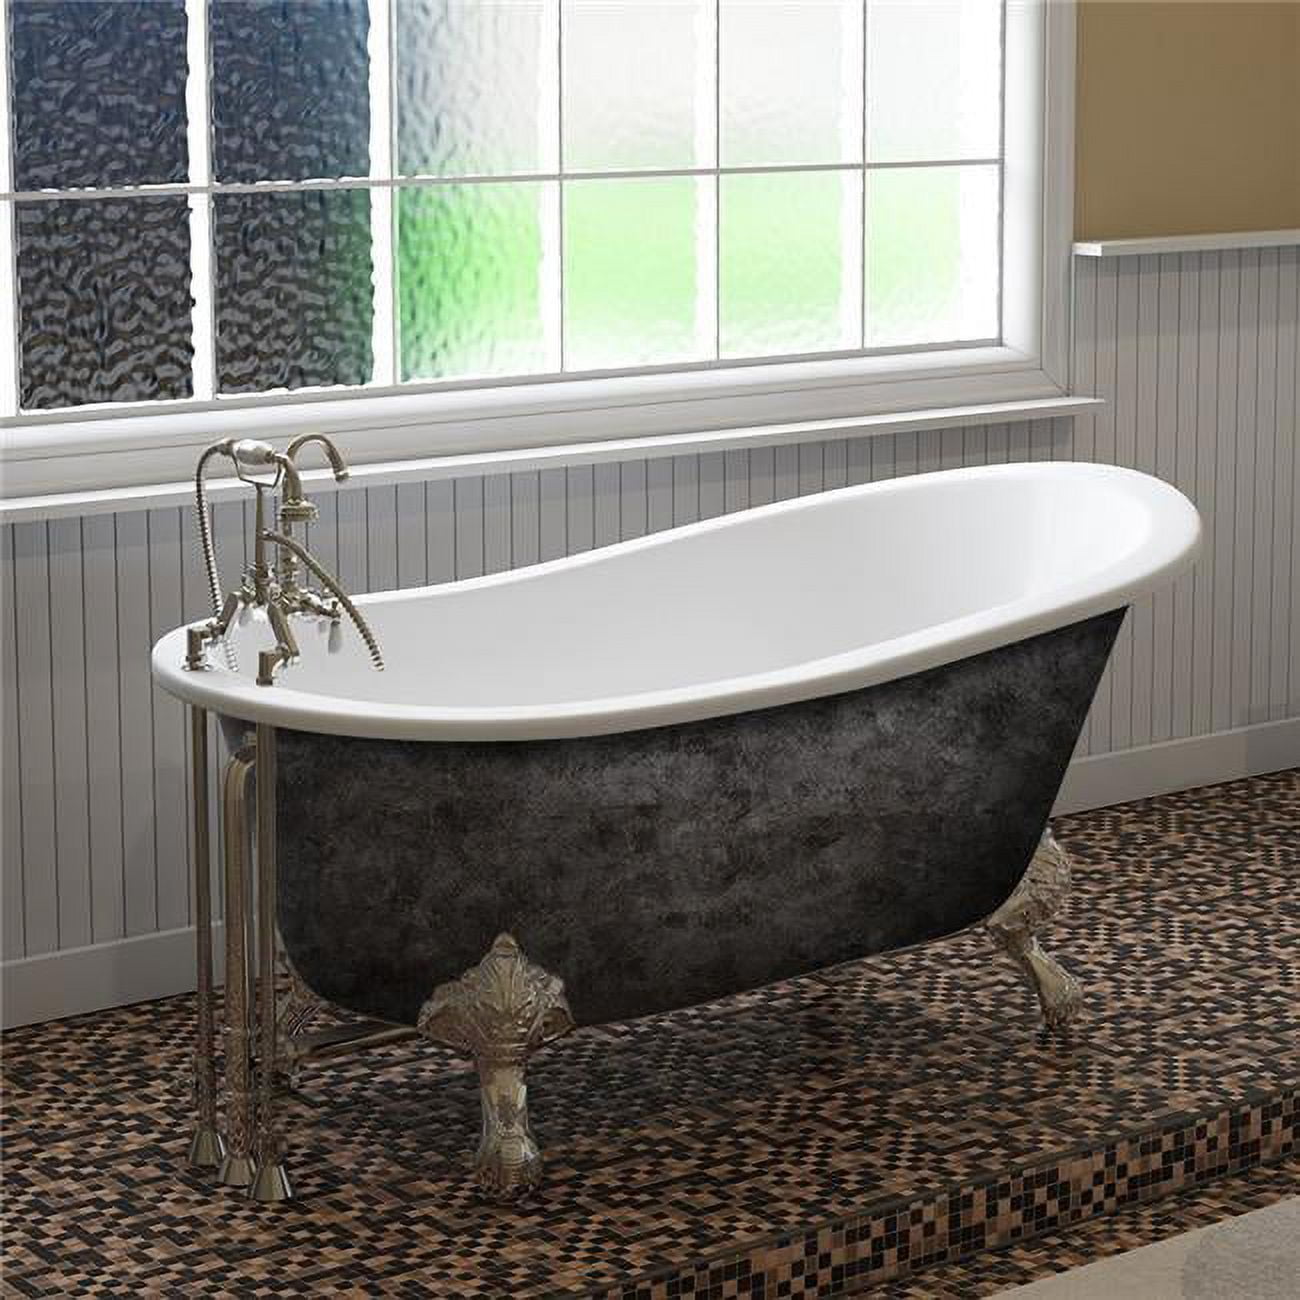 St61-dh-cp-sp 61 X 30 In. Scorched Platinum Cast Iron Slipper Bathtub With 7 In. Deck Mount Faucet Holes & Polished Chrome Feet